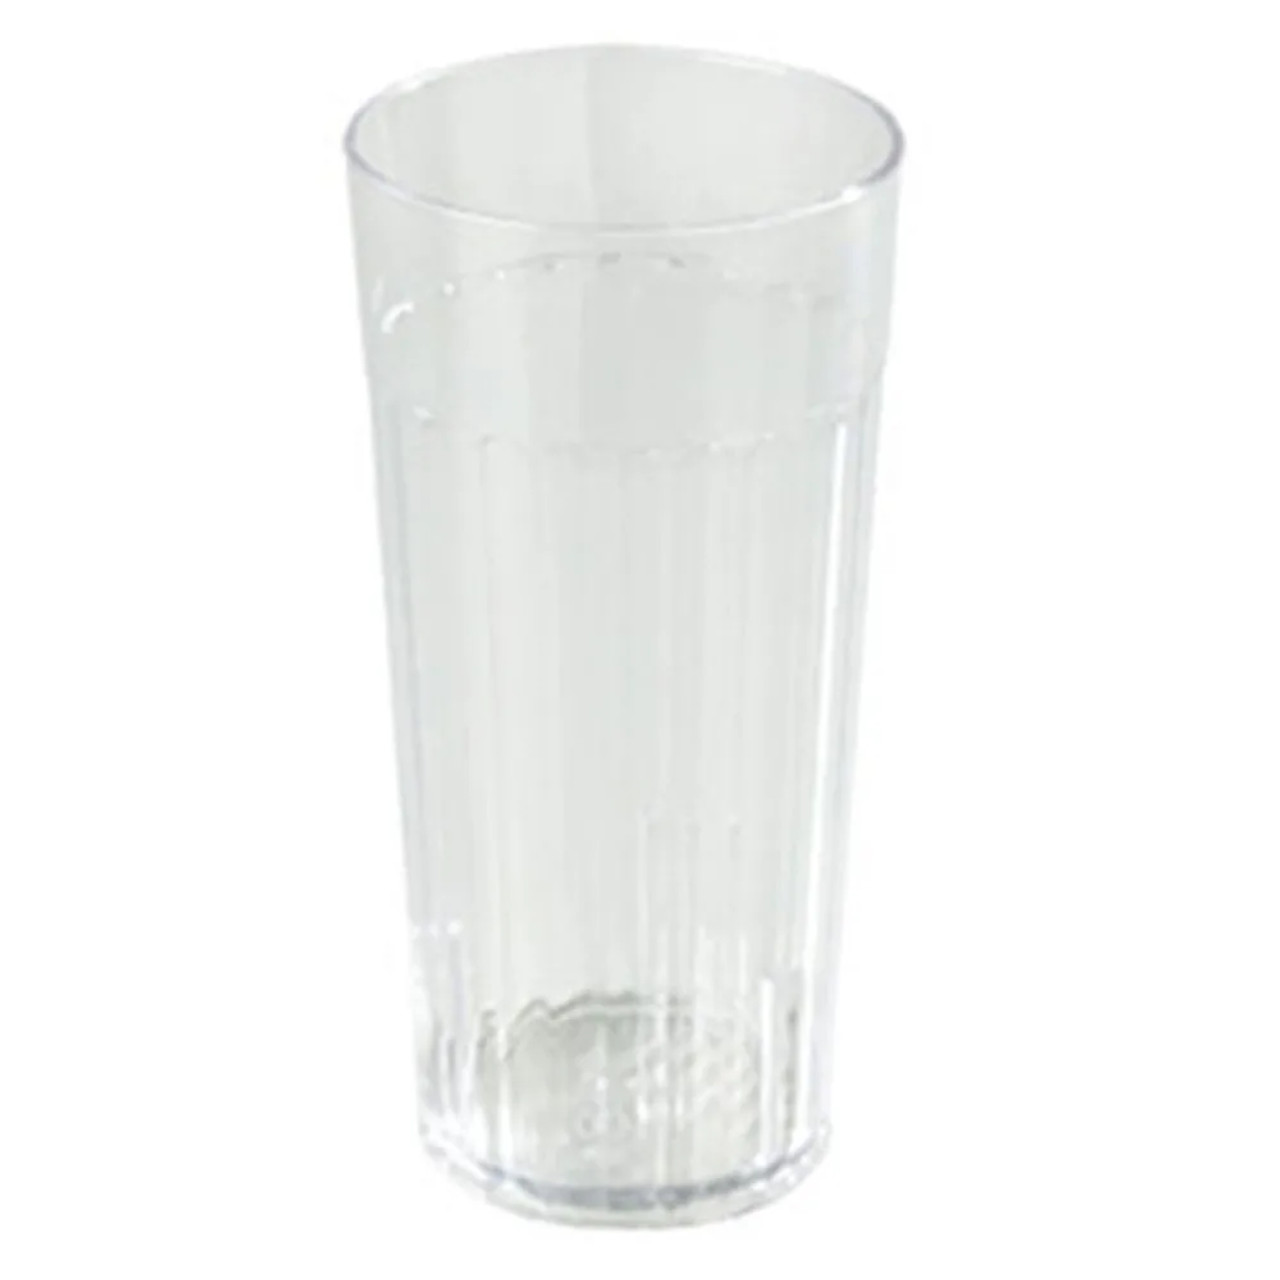 Carlisle 20 oz Clear Fluted Plastic Tumbler (72/Case) - Durable Material - Chicken Pieces